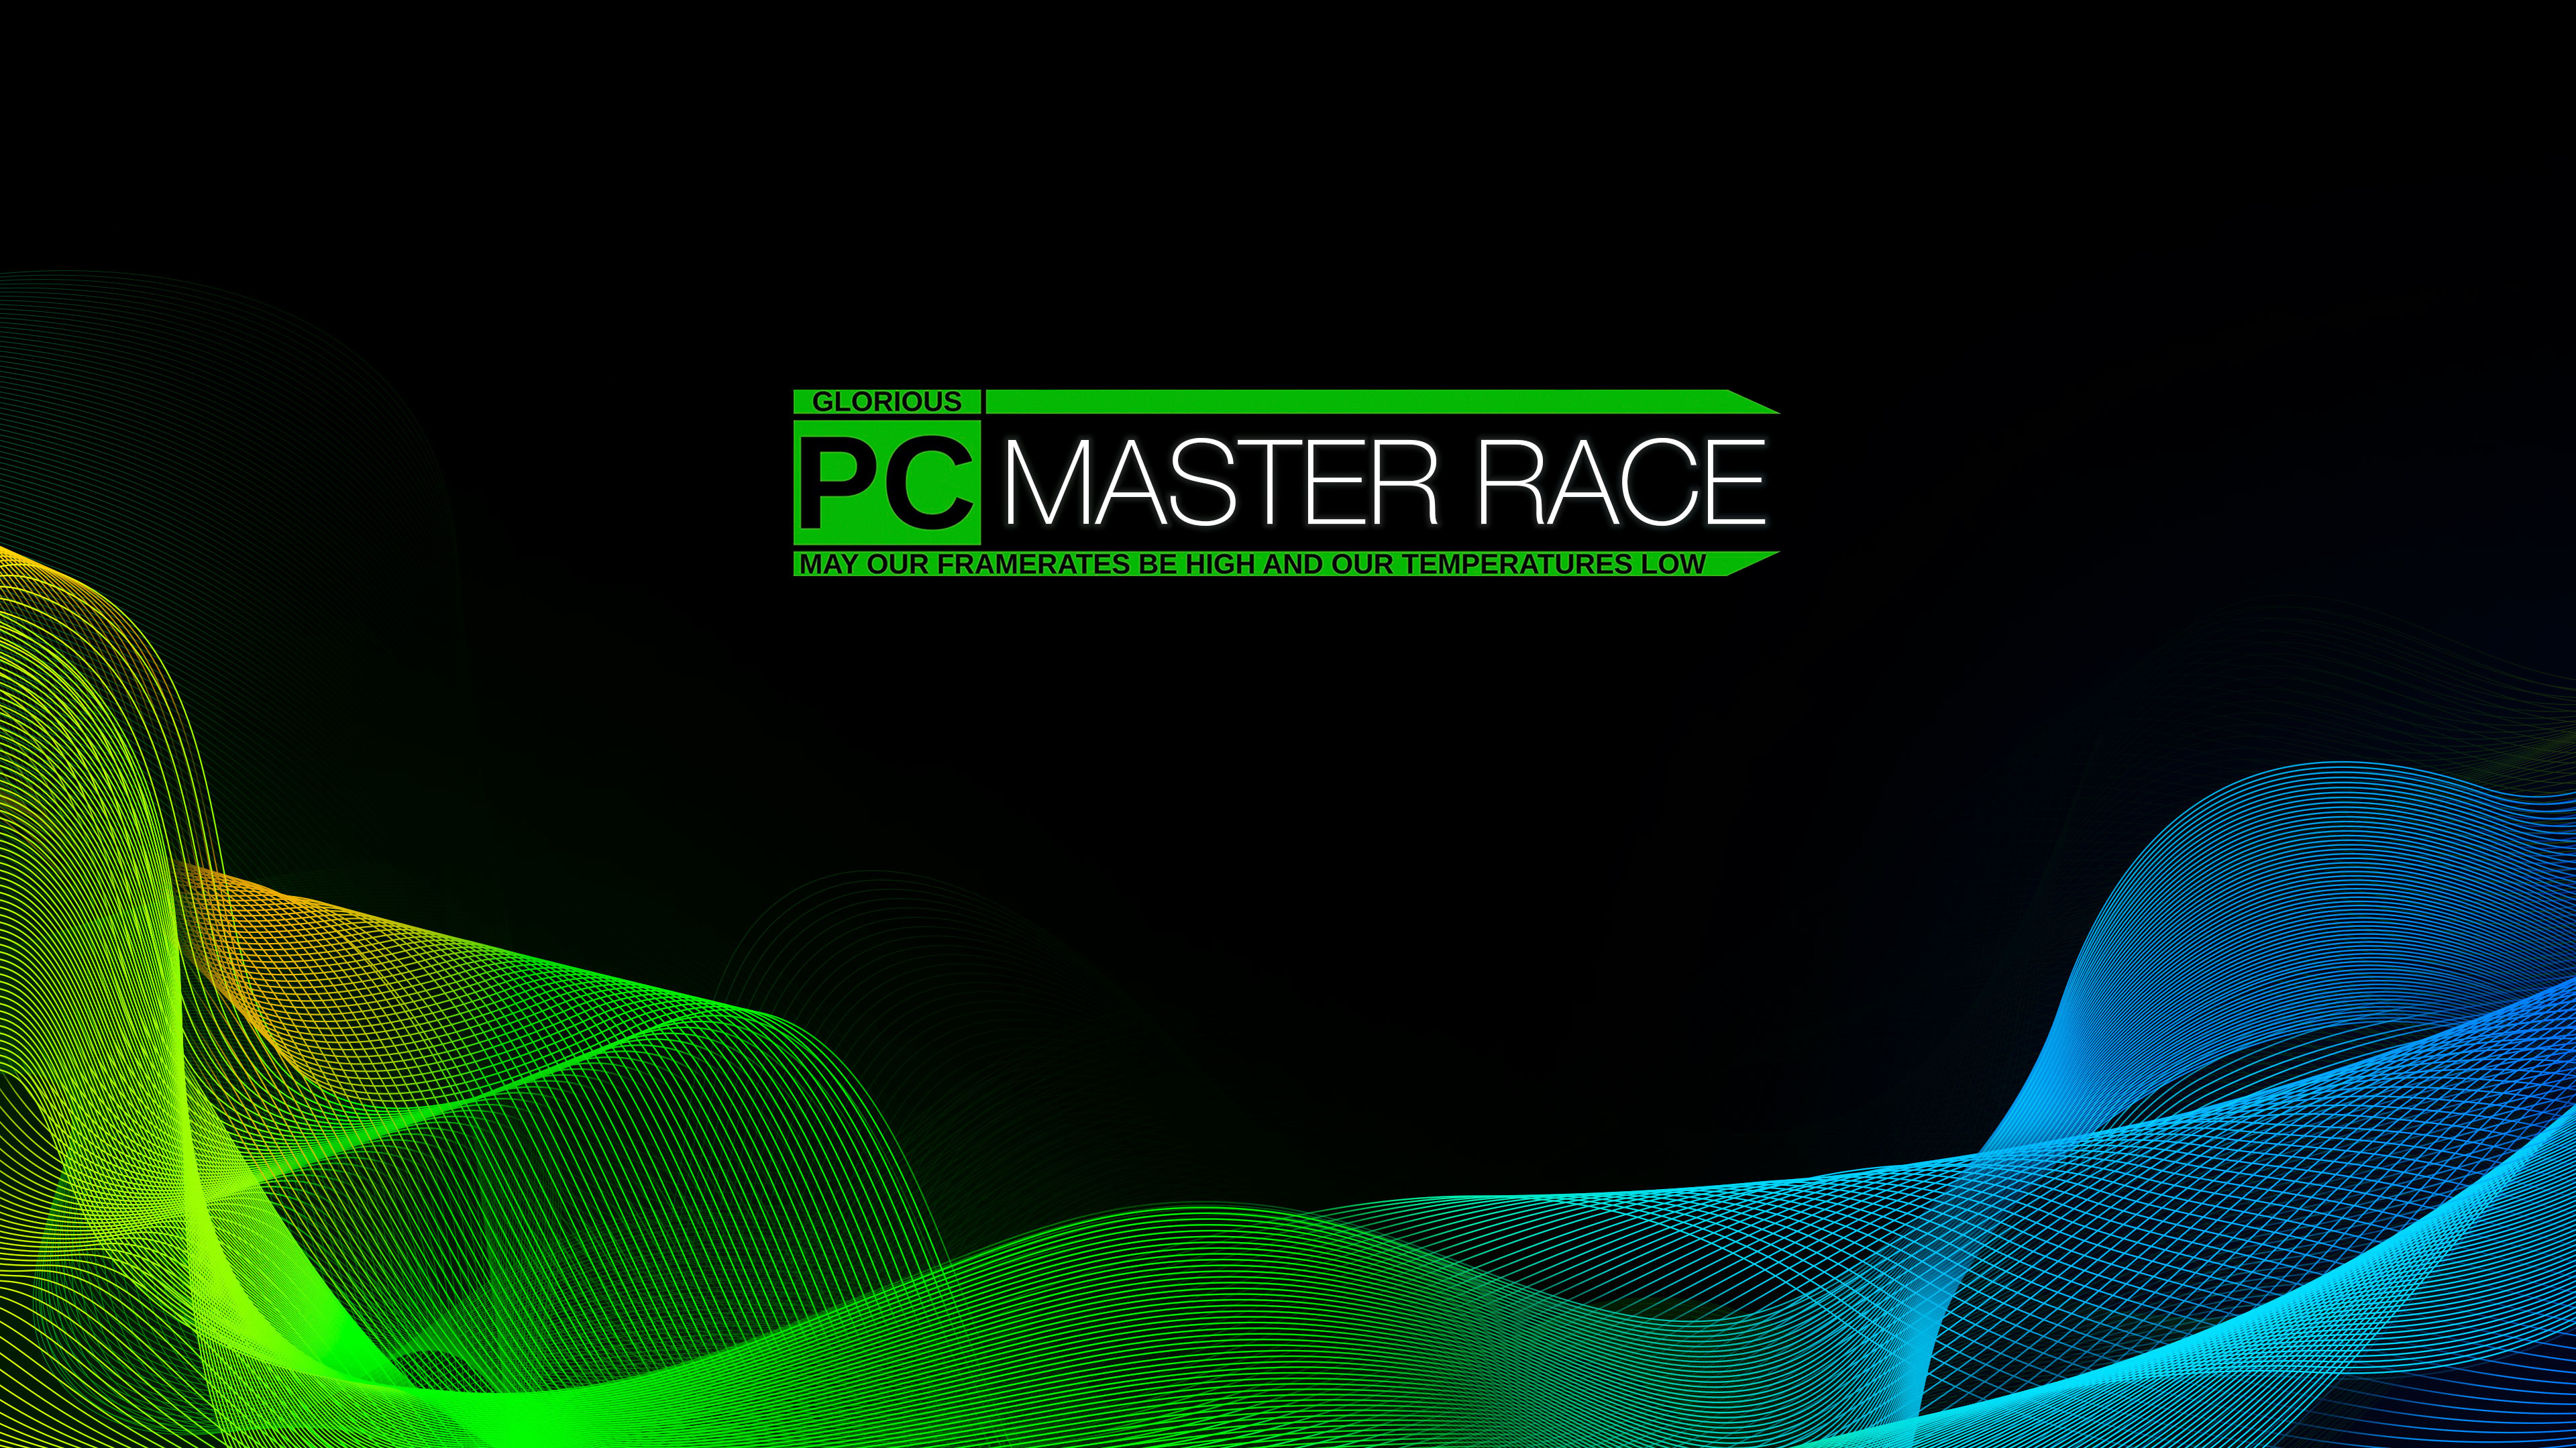 3840x2159 ScreengrabMade a PCMR version of the popular Razer wallpaper that a lot of  people seem to be using!